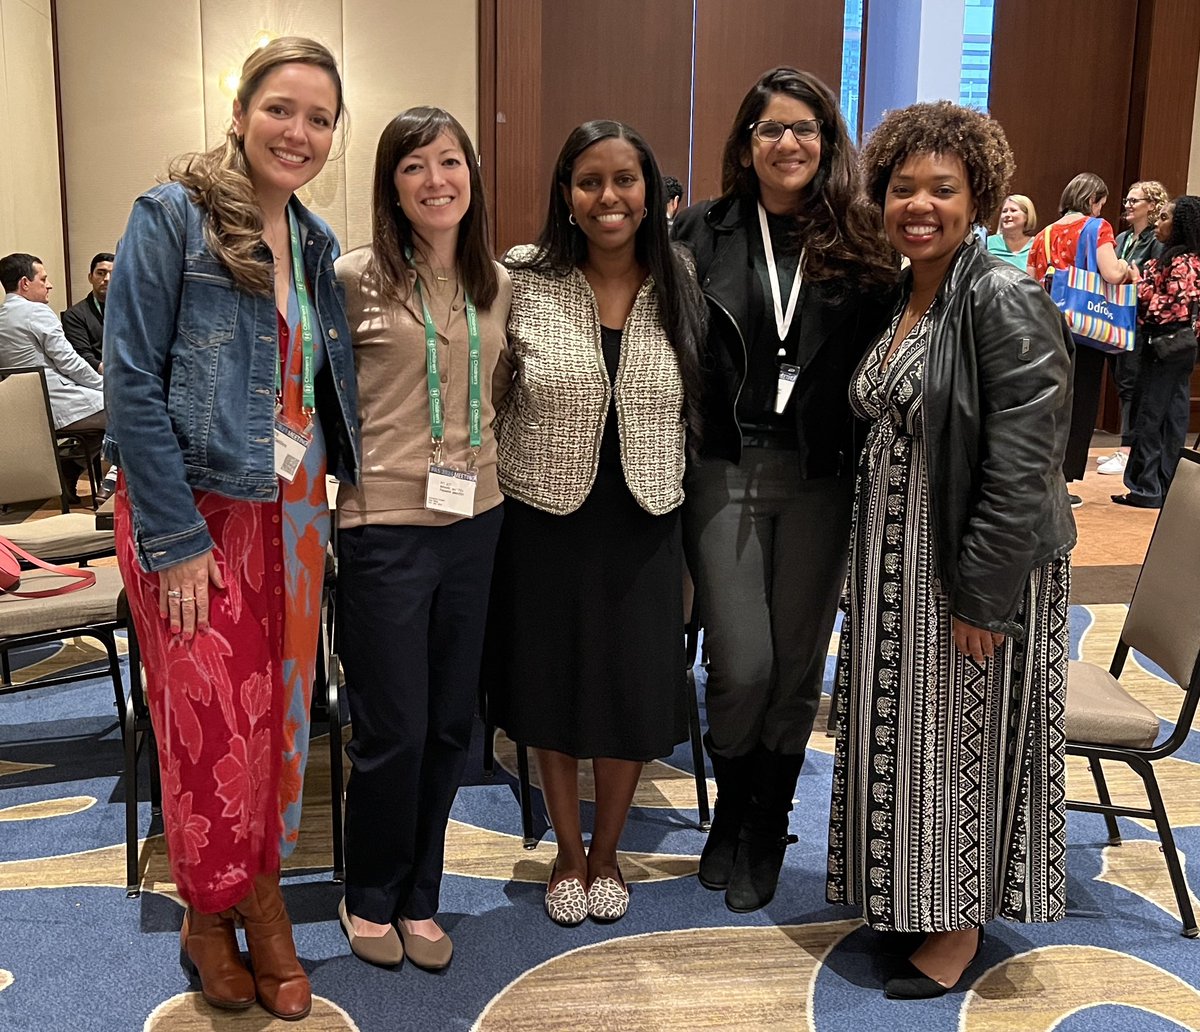 So many reunions with former residents at @StanfordPeds reception! @Doc_Vie is finishing PEM fellowship, Chisom is back as PEM @StanfordEMED faculty @alebarrero Nichole, Maya, @carminmari were interns when I was @LPCHPedsChiefs & rocking it as faculty in NICU, Gen Peds, PHM